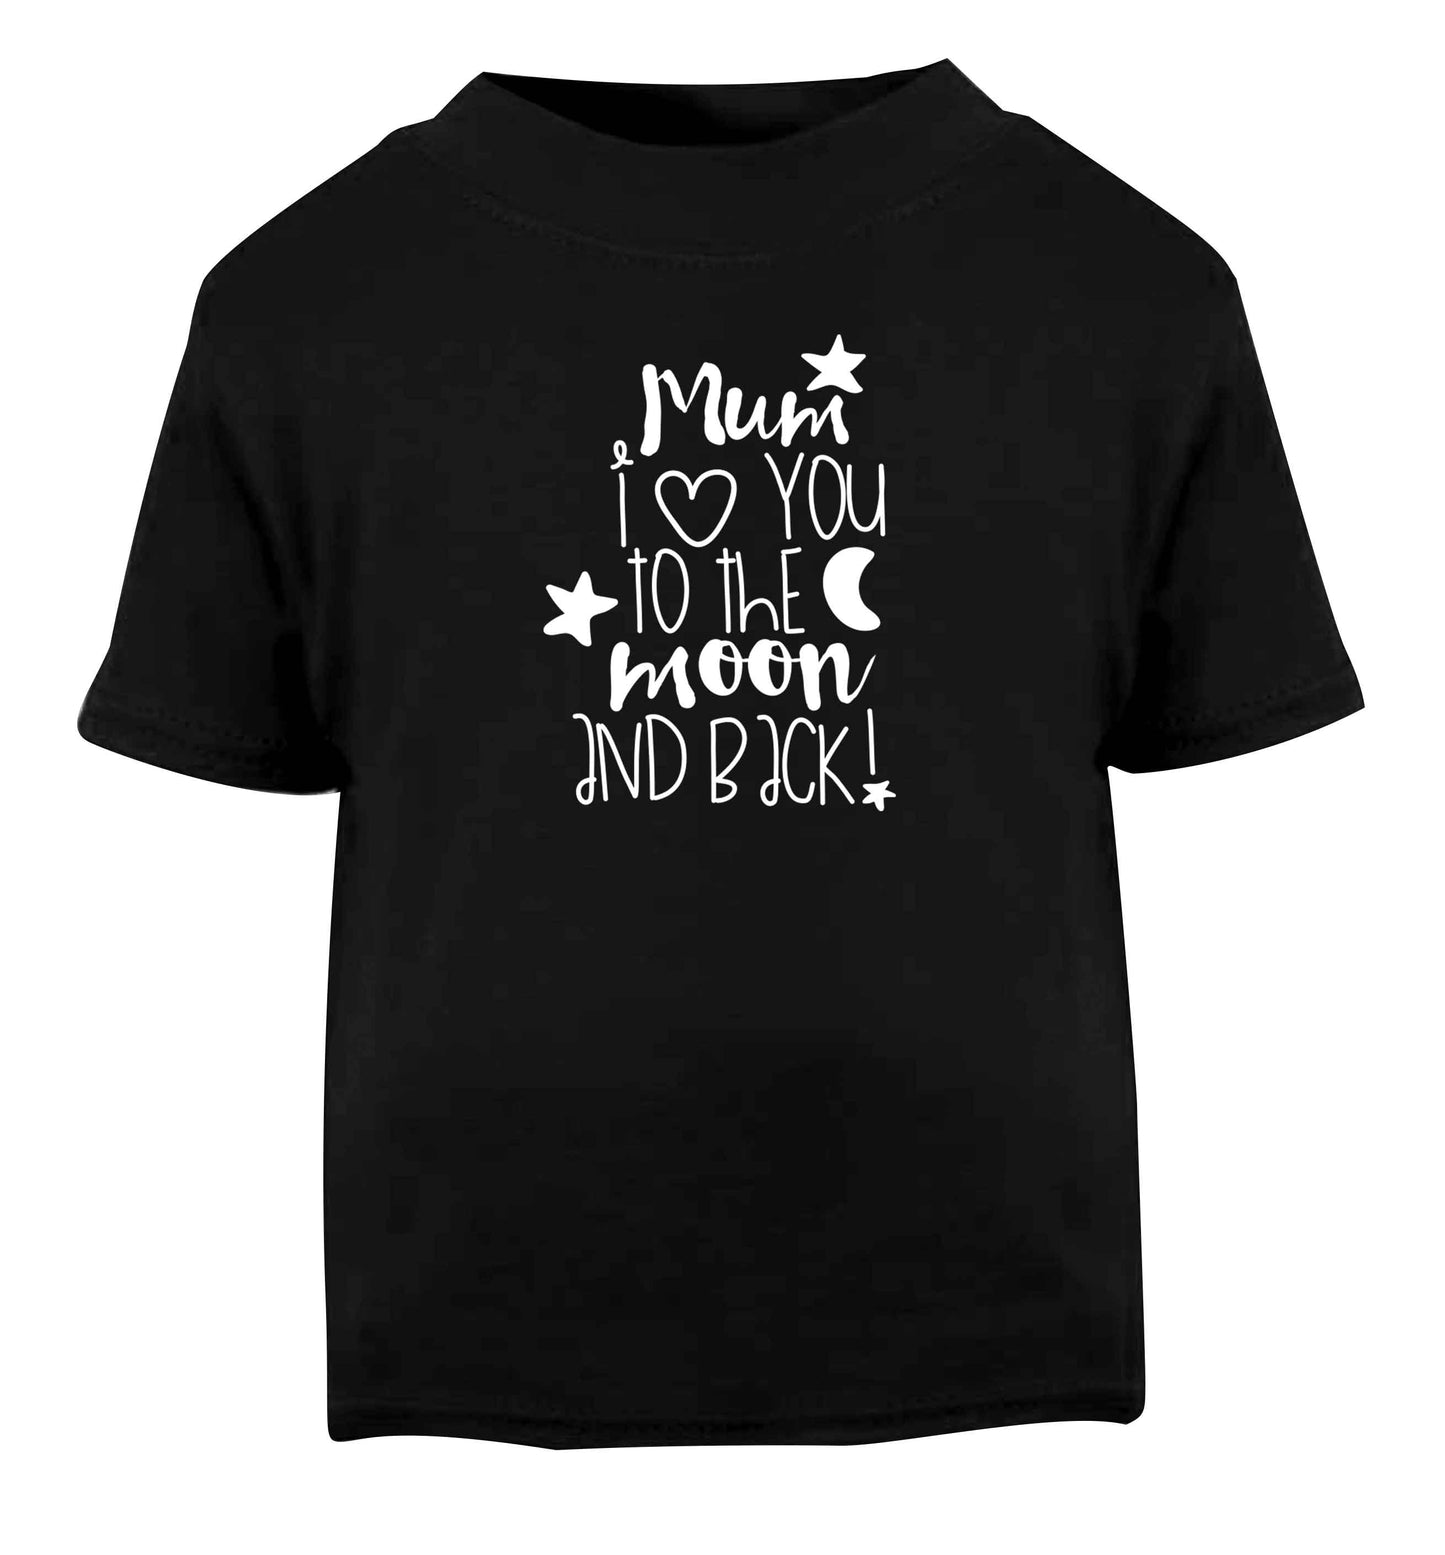 Mum I love you to the moon and back Black baby toddler Tshirt 2 years